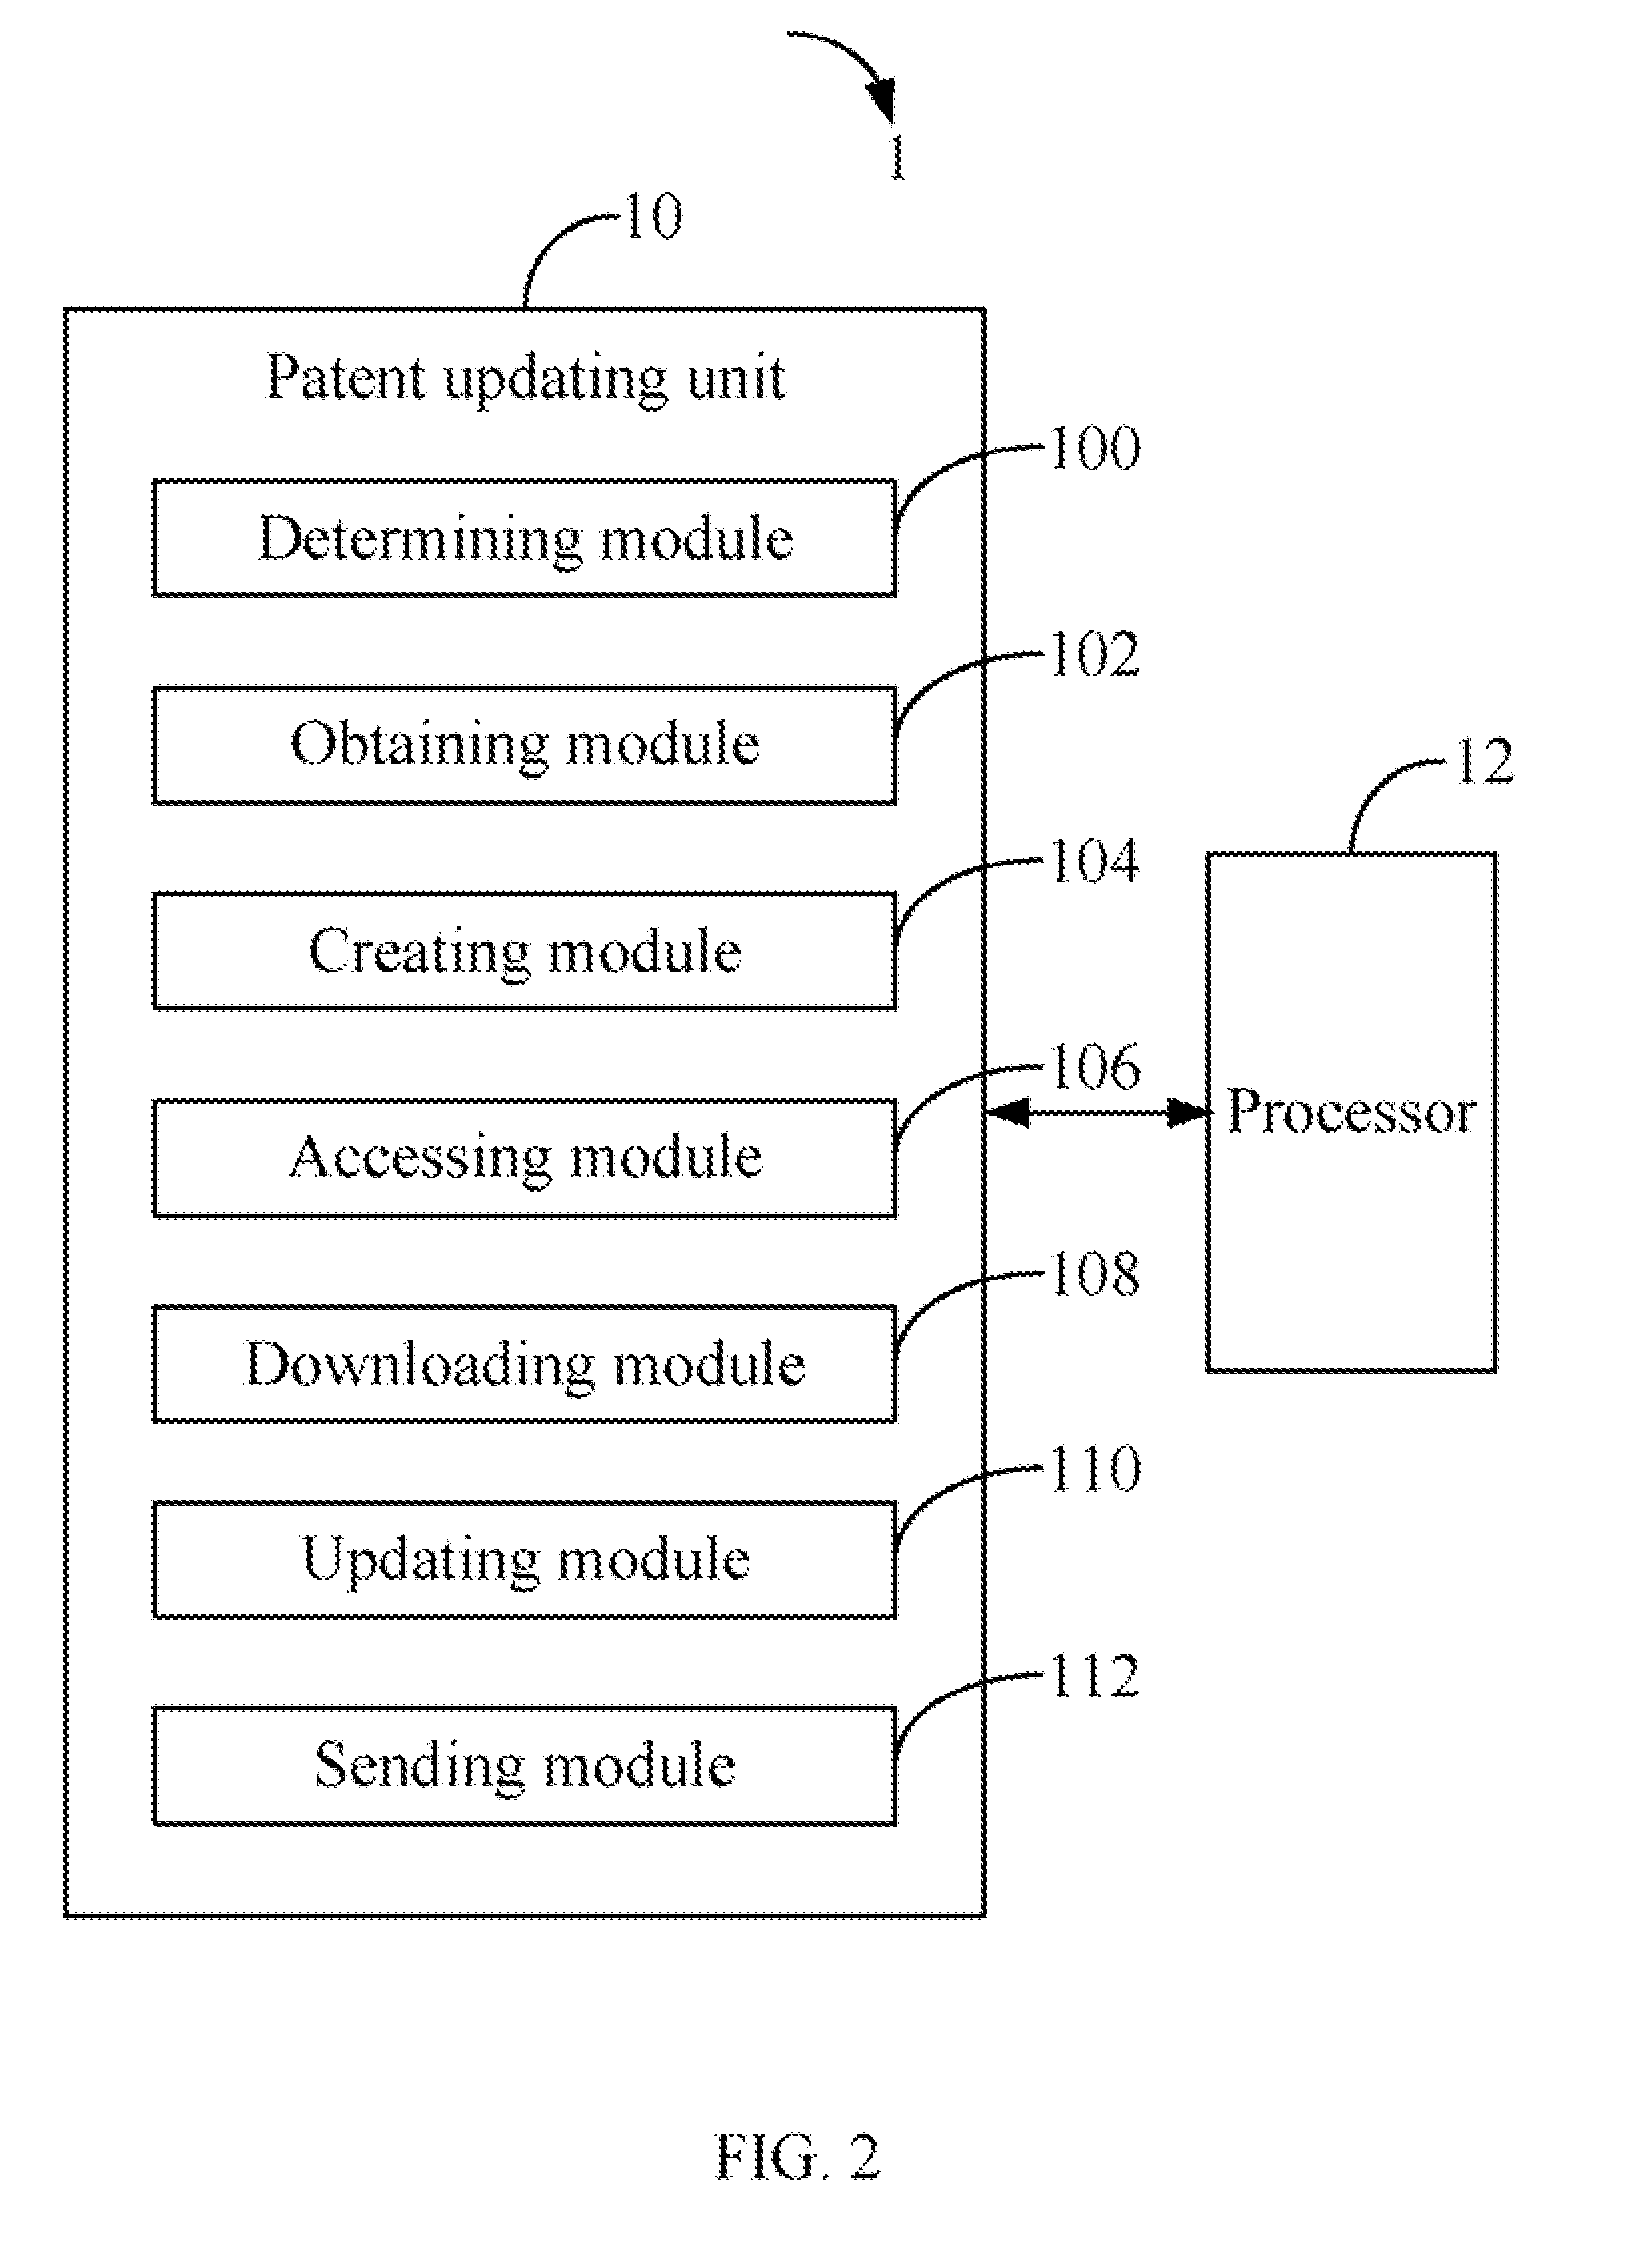 System and method for automatically updating patent examination procedures